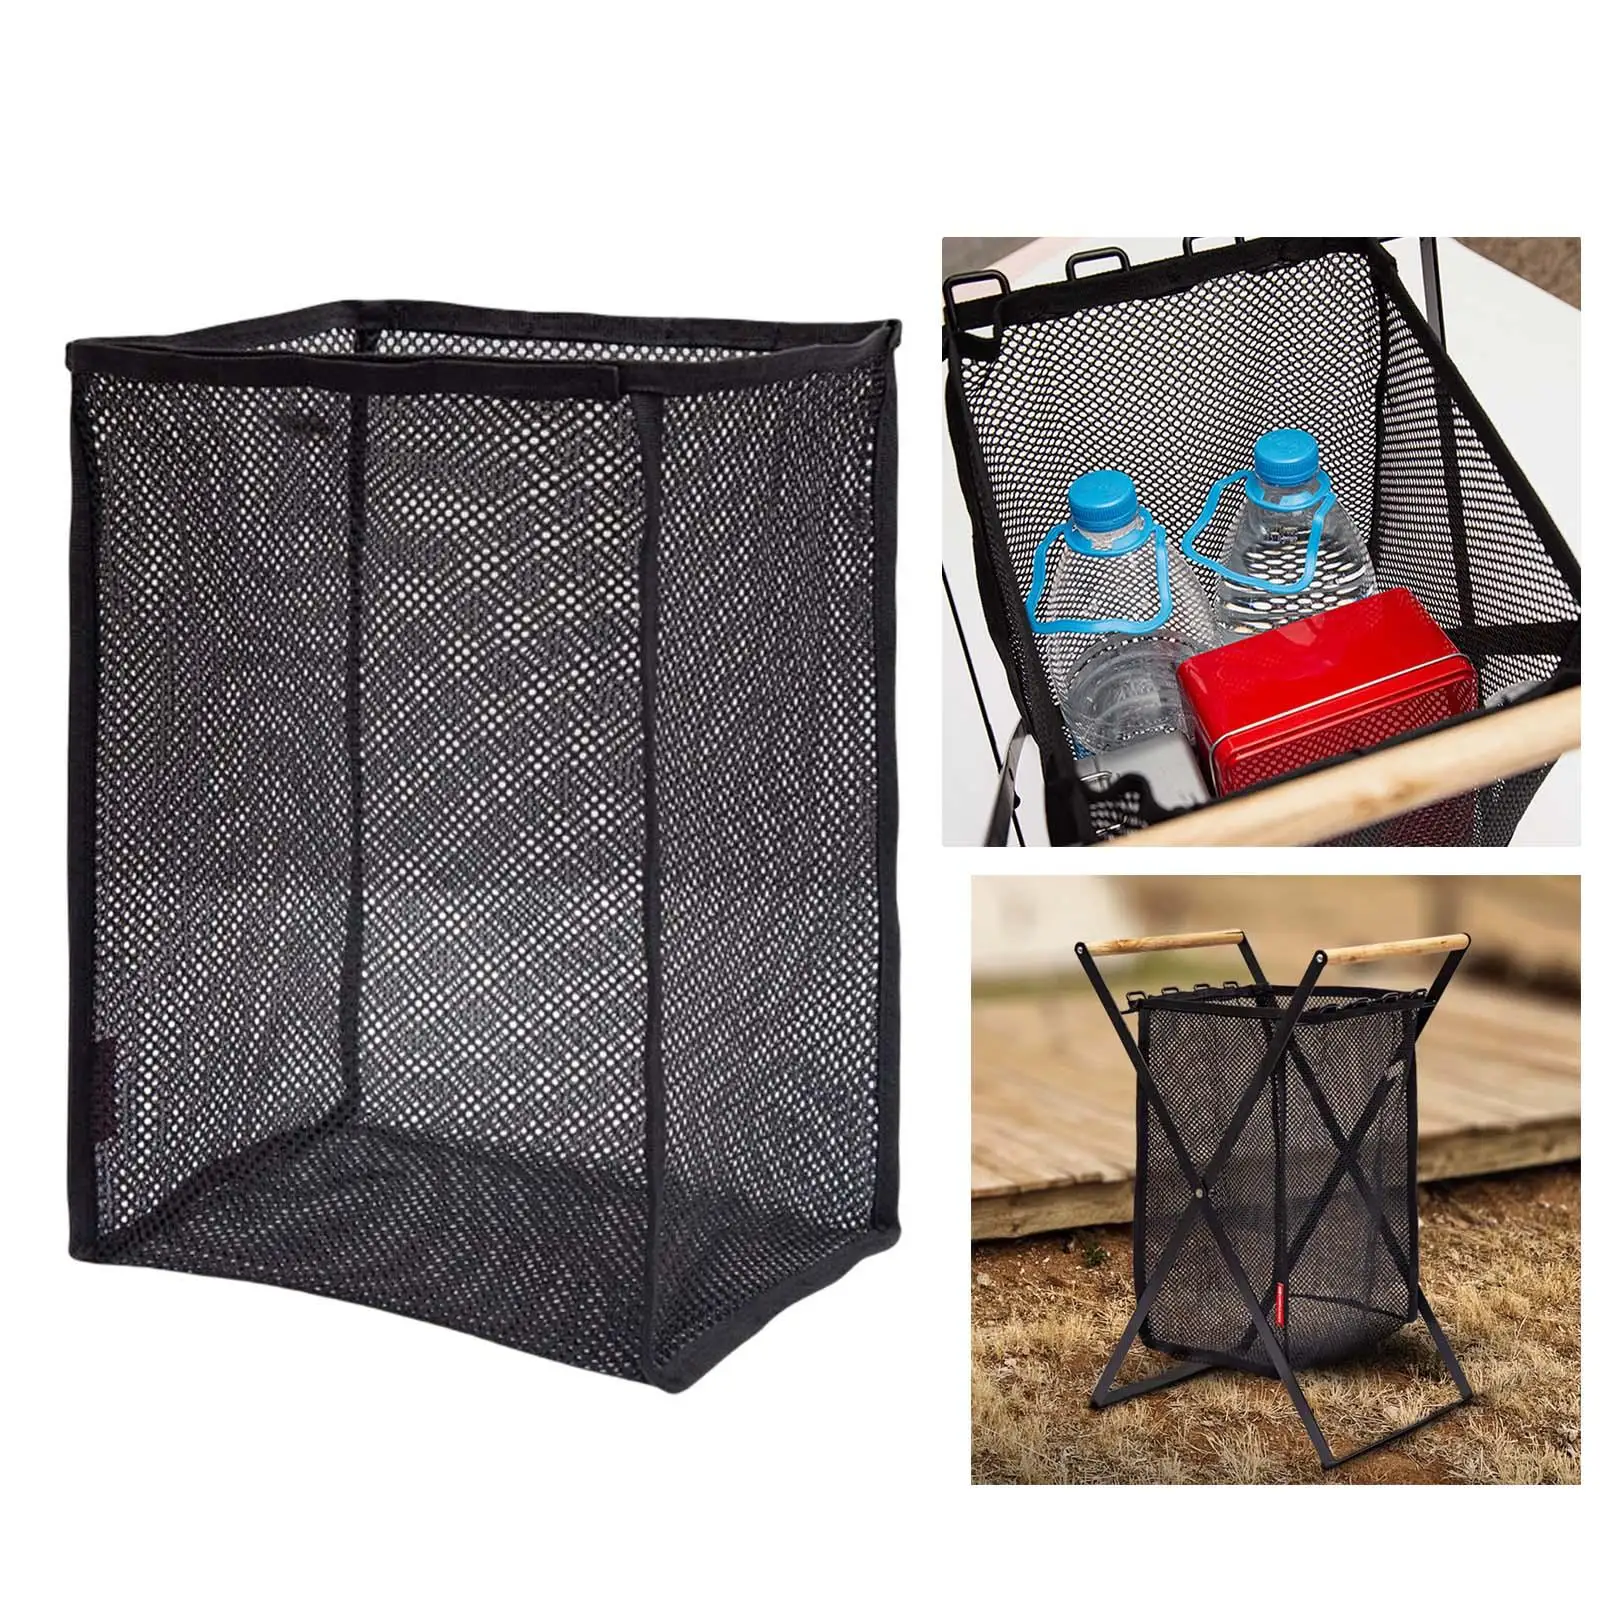 Mesh Laundry Basket Wash Bag Organizer Dirty Clothes Basket Durable Storage Basket Washing Clothes Bag for Outdoor Camping